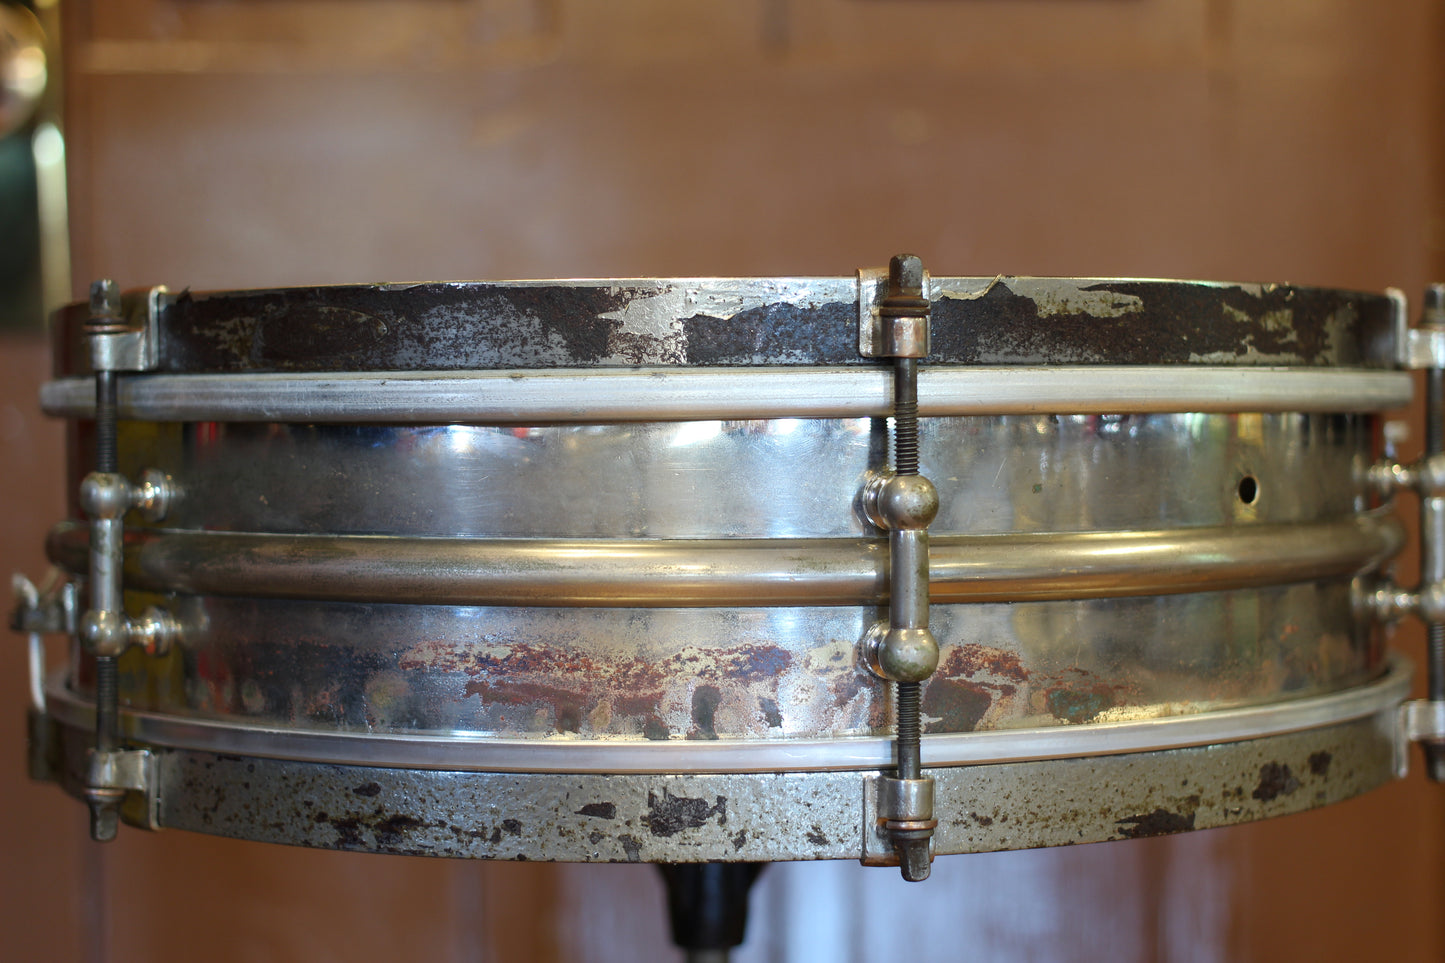 1920's Ludwig & Ludwig Dance Model 4"x14" Nickel over Brass Snare Drum